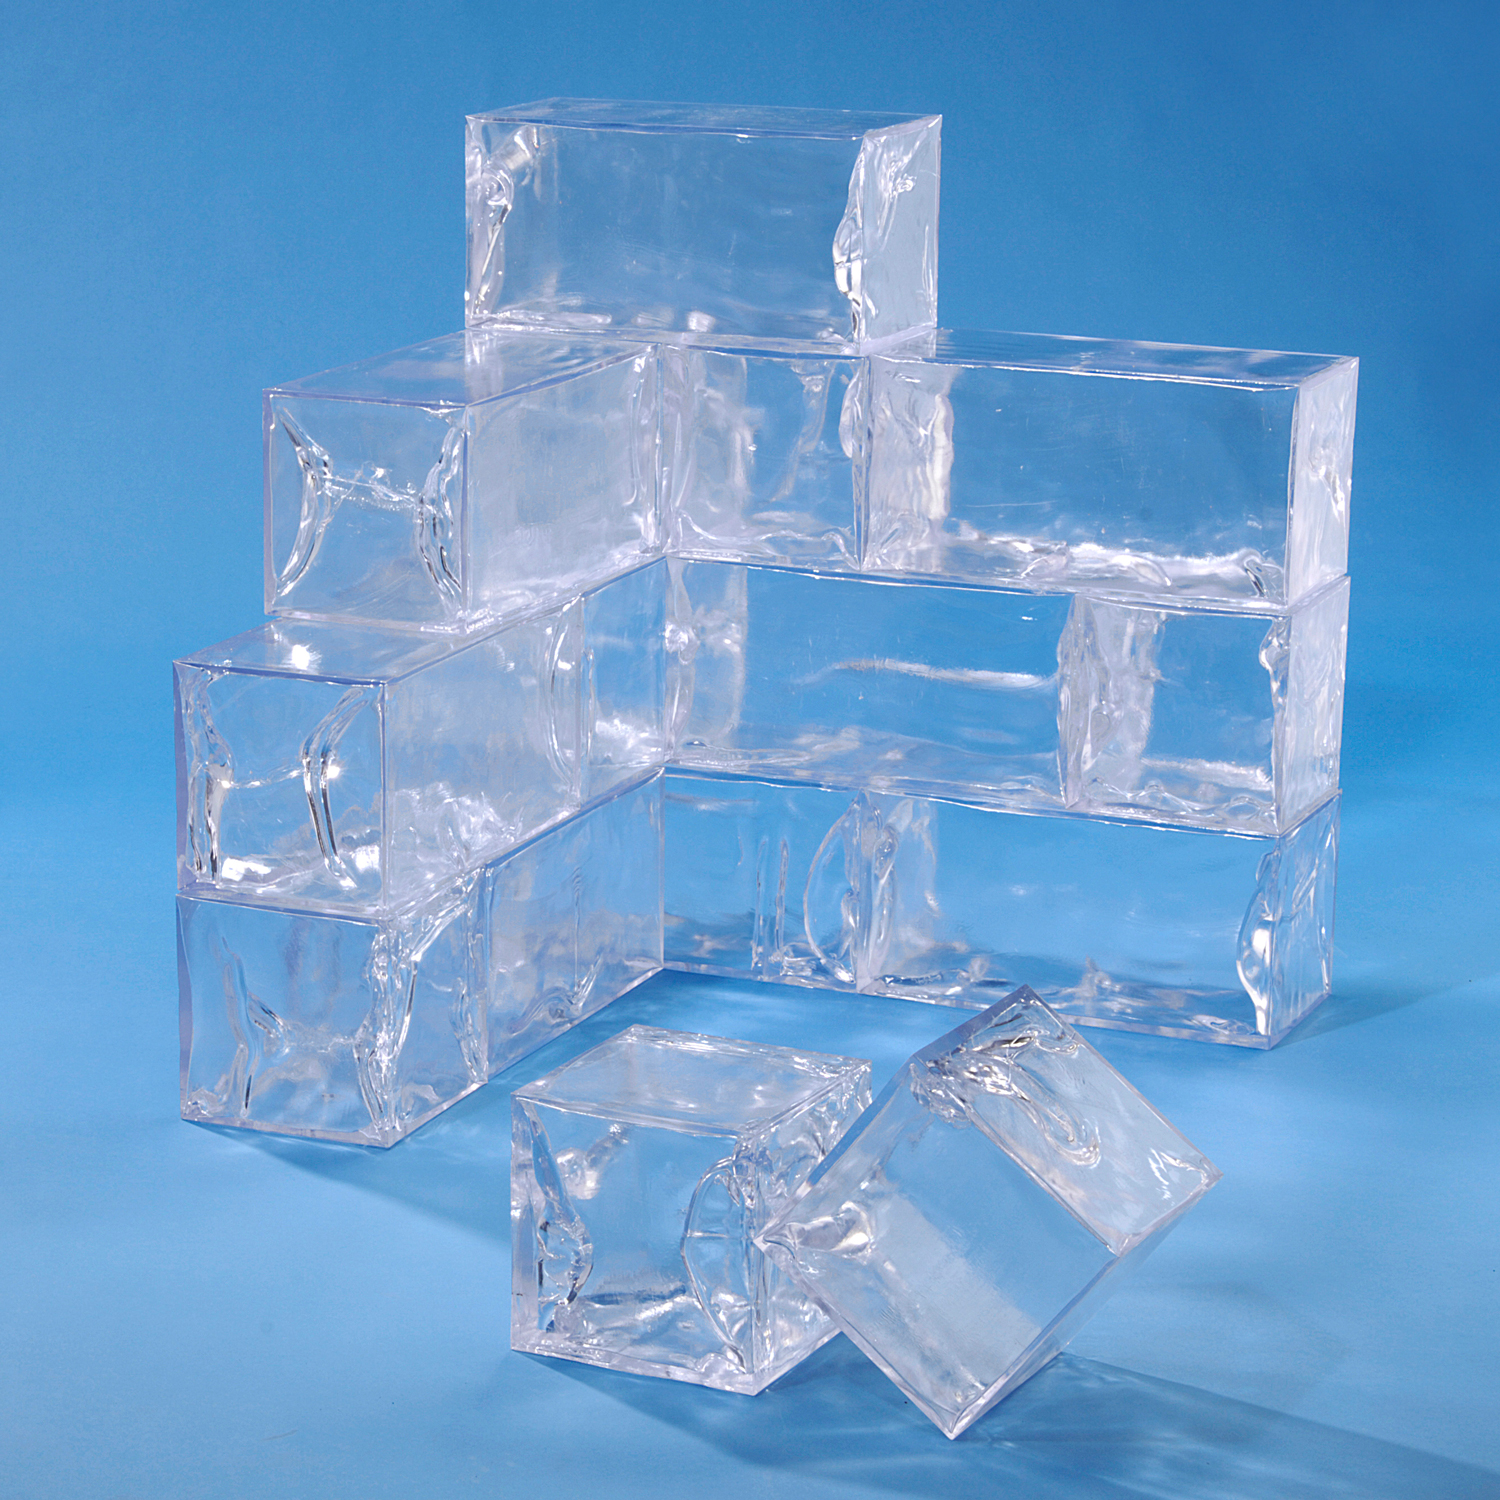 Synthetic decorative Ice Cube: from plastic